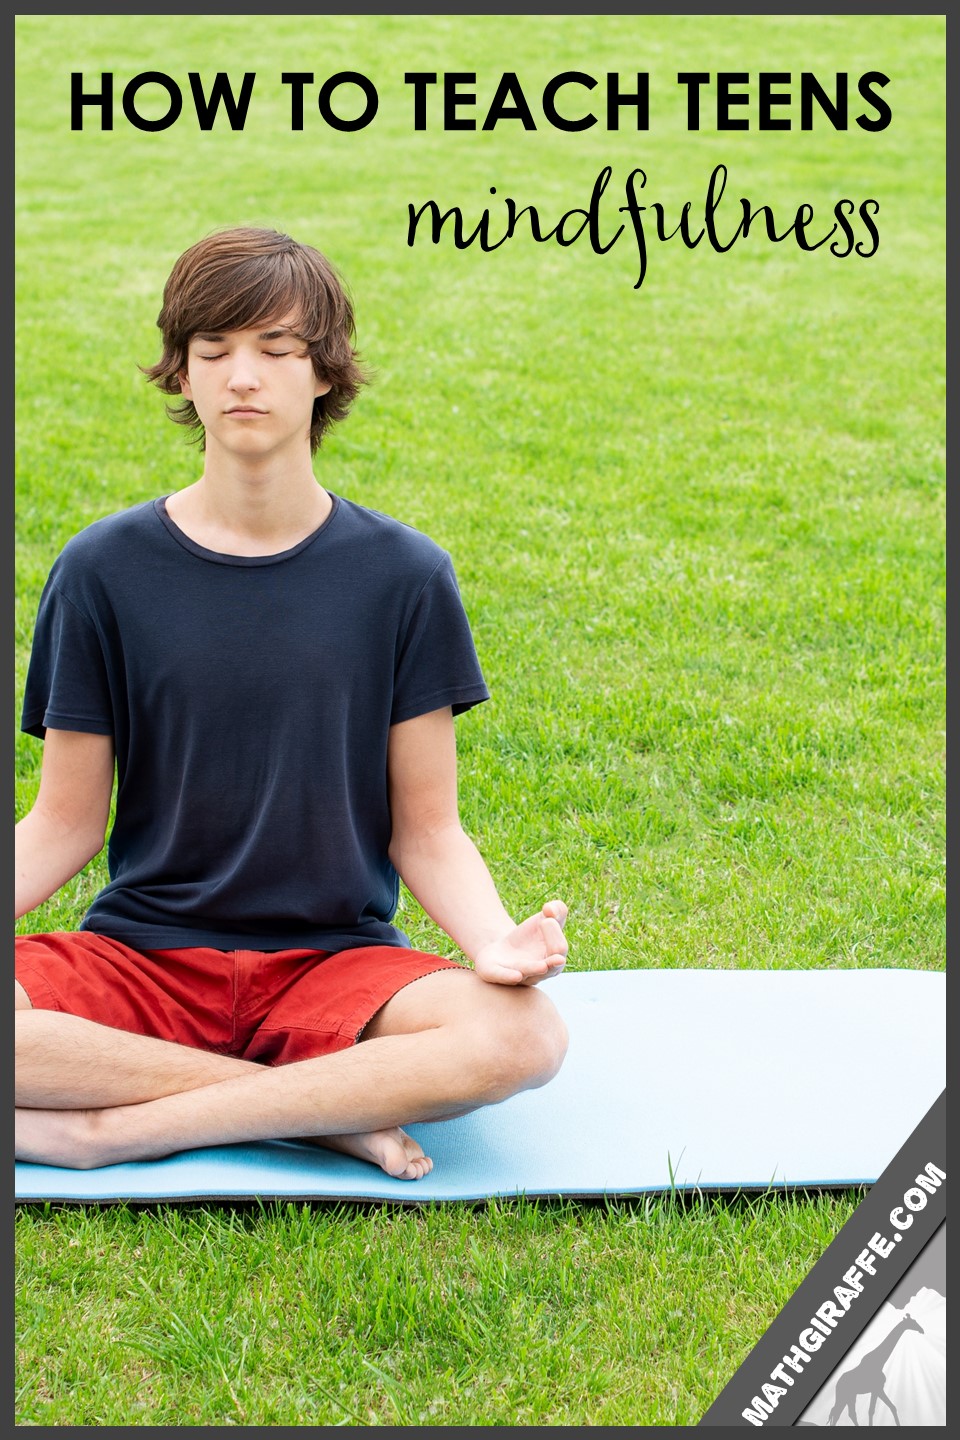 Strategies for Teaching Mindfulness Habits to Teens